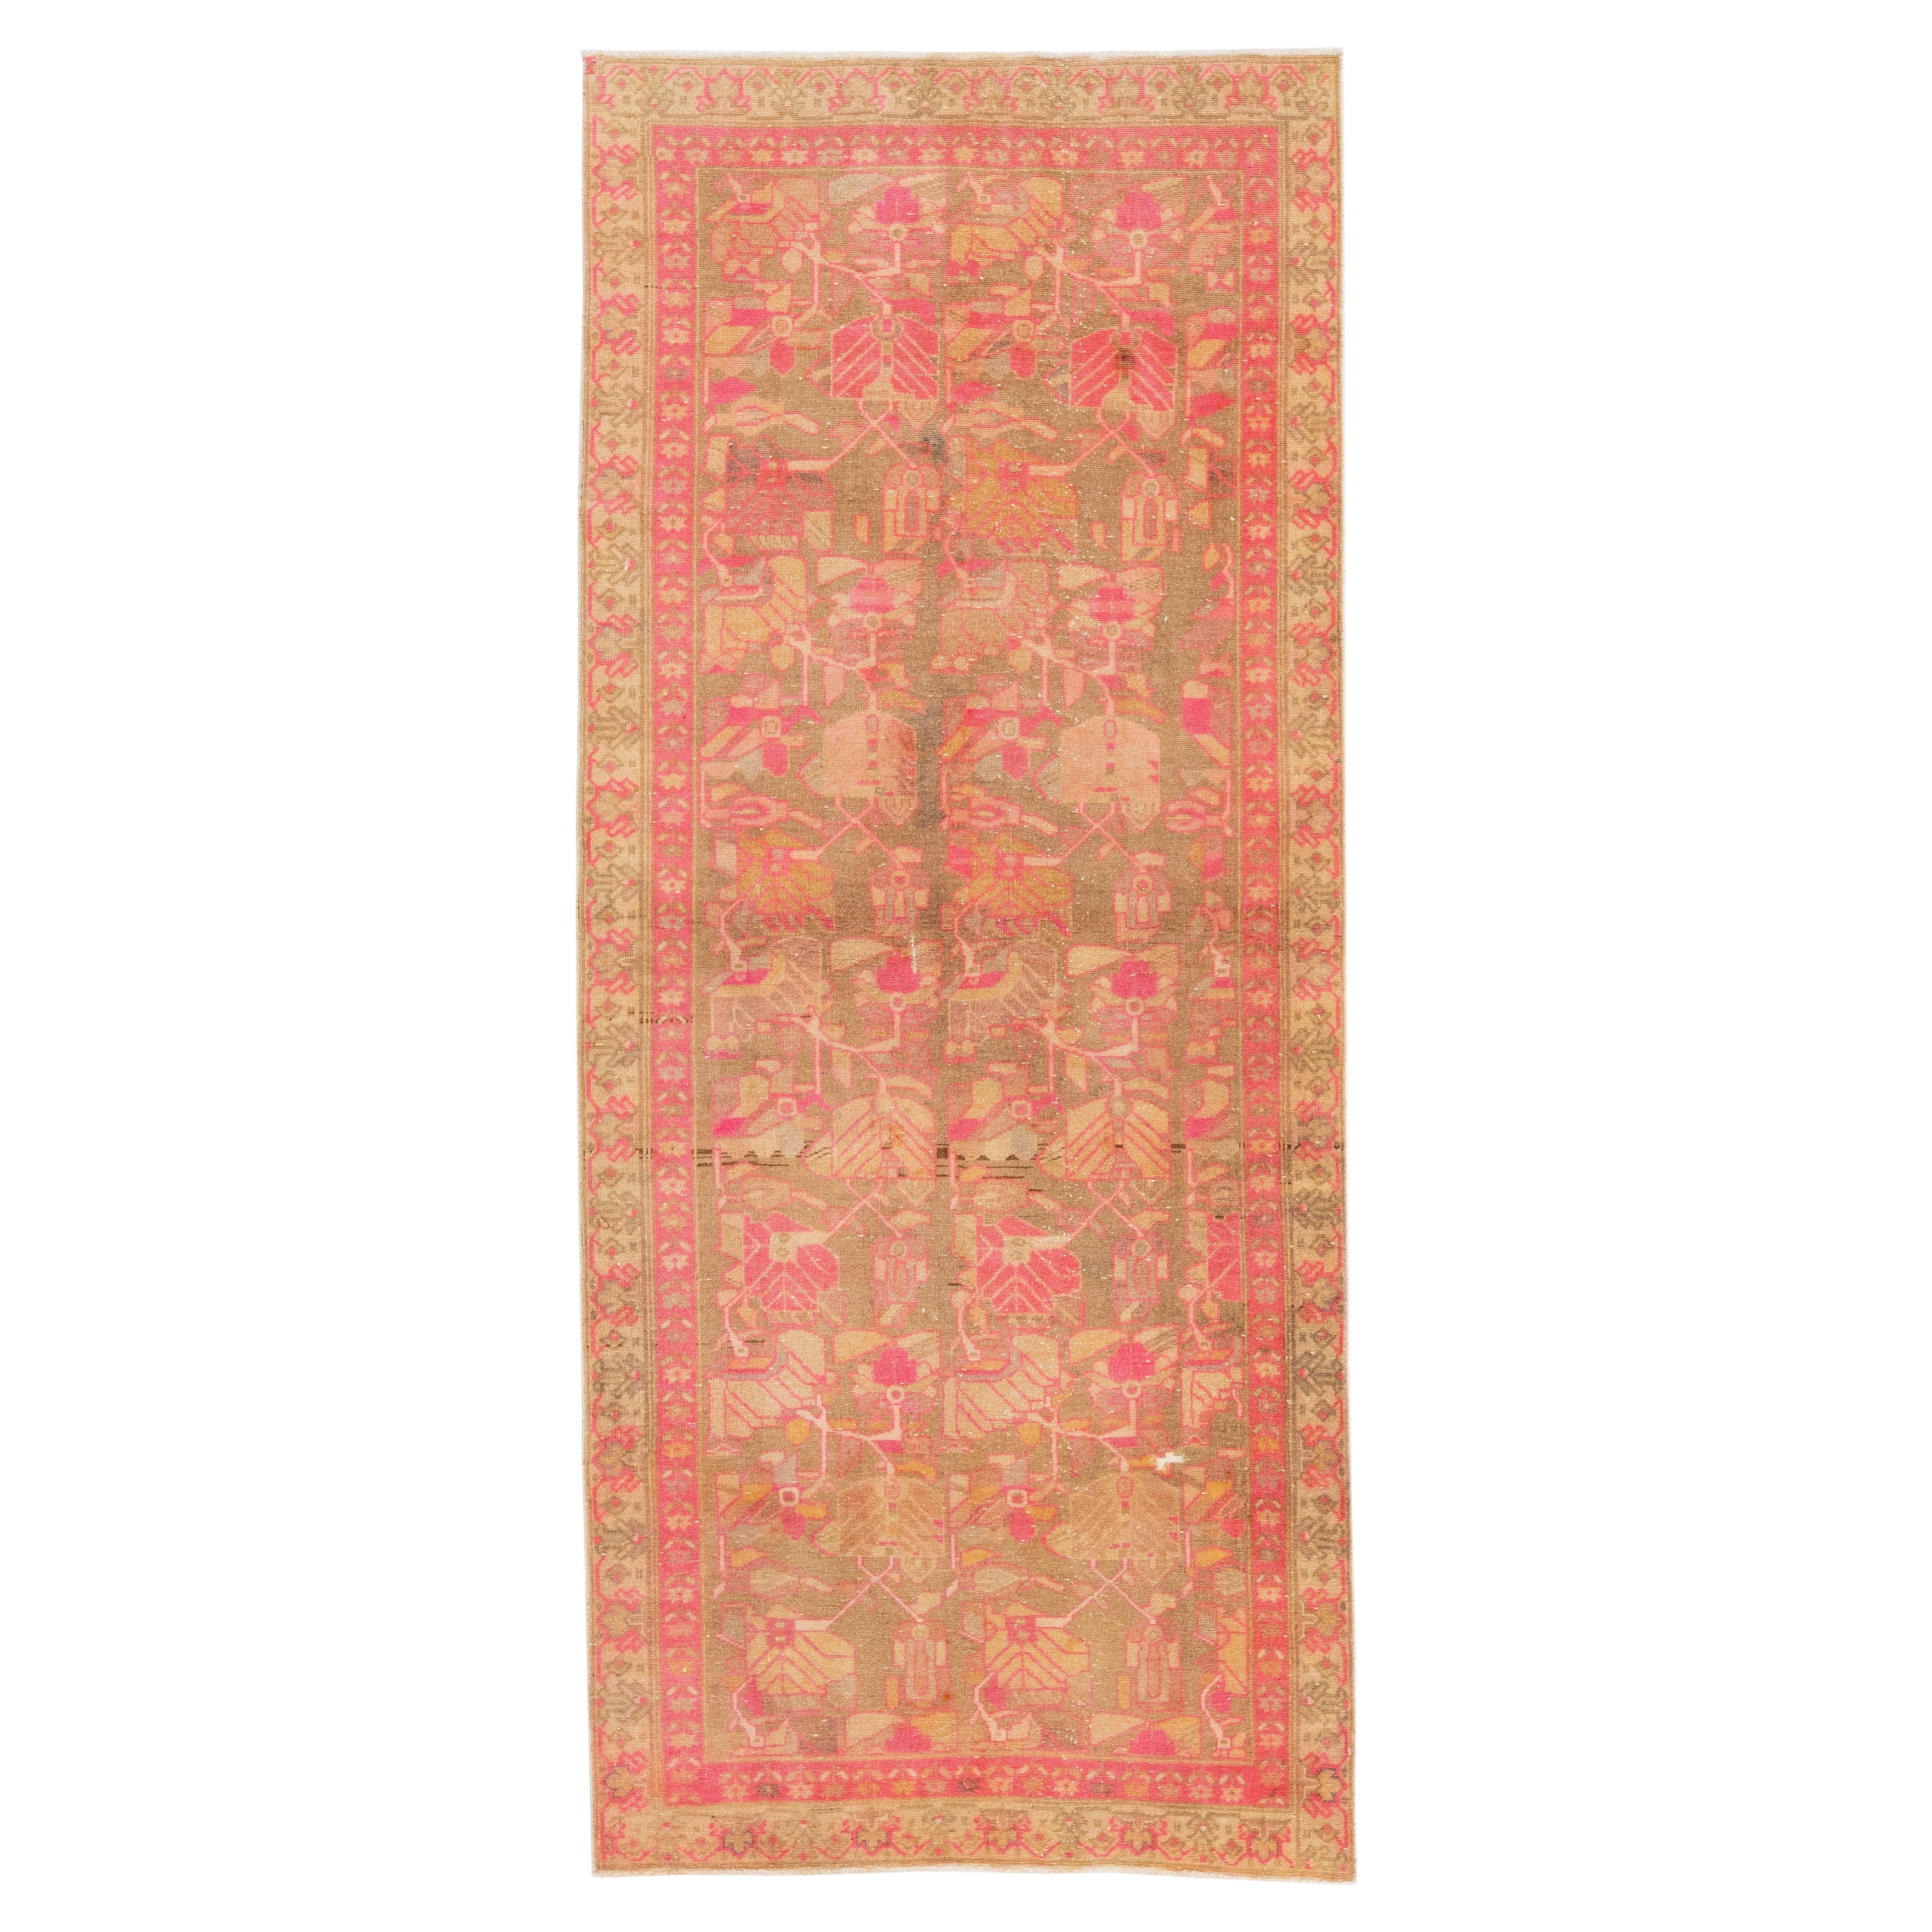 Handmade Vintage Persian Malayer Allover Wool Rug with Brown & Pink Field